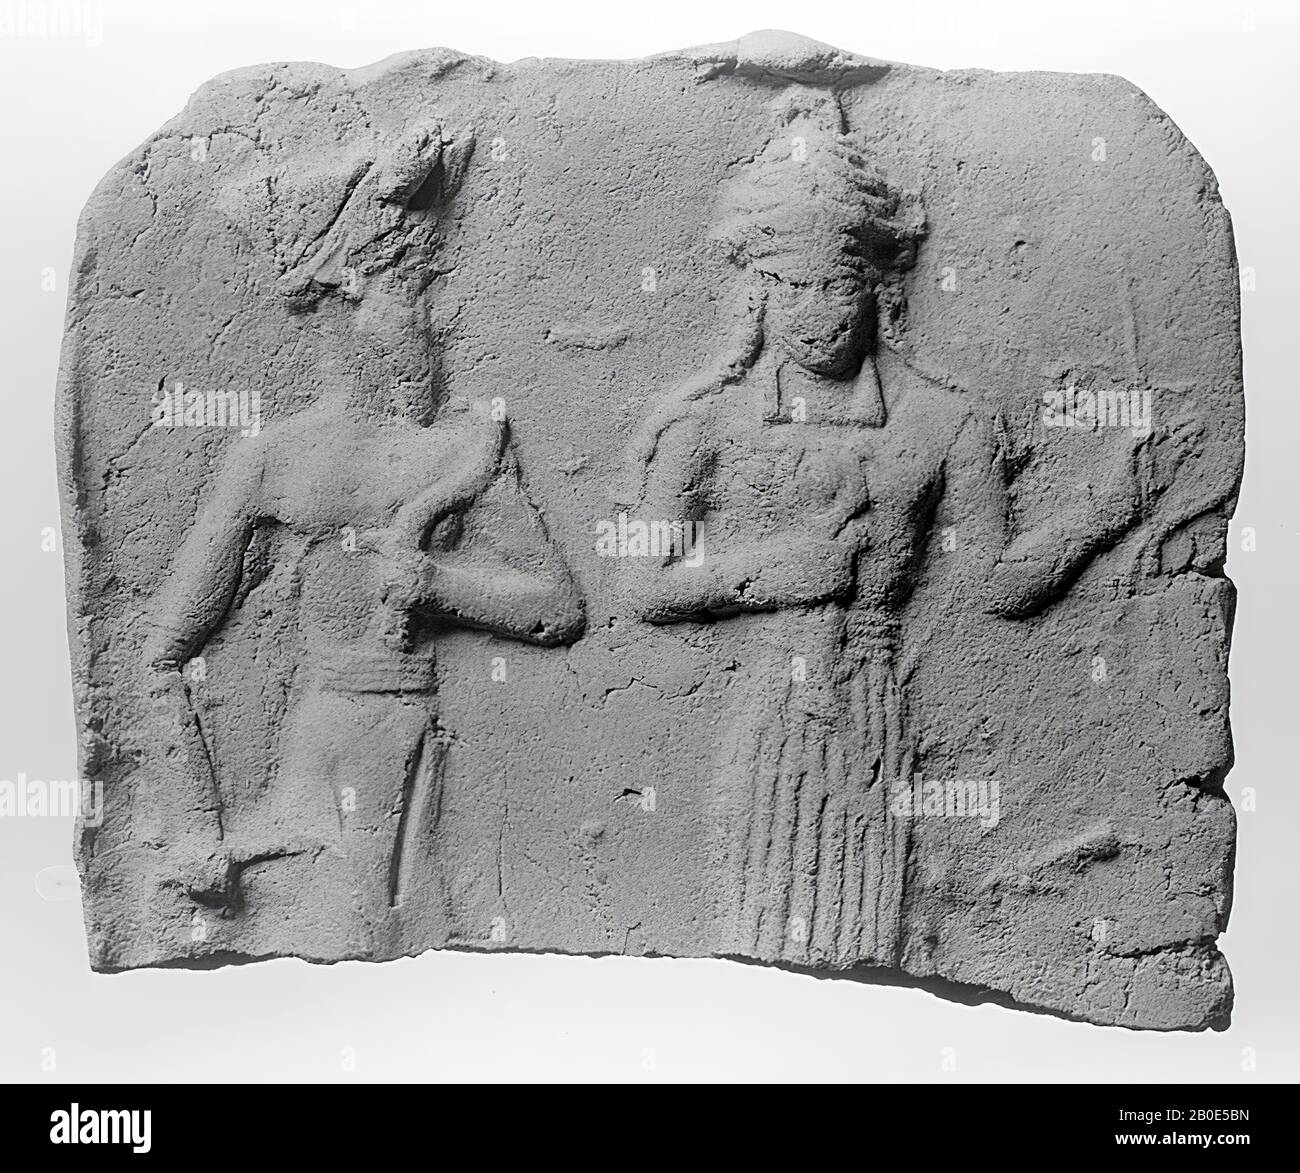 A plaque made in a mold. It shows a devotee who is taken by hand by the goddess Ishtar or led into the throne of the supreme god., Ornamental plate, pottery, clay, mold, L 5.4 cm, W 6.5 cm, Old Babylonian Period 1830-1531 v. Chr., Iraq Stock Photo